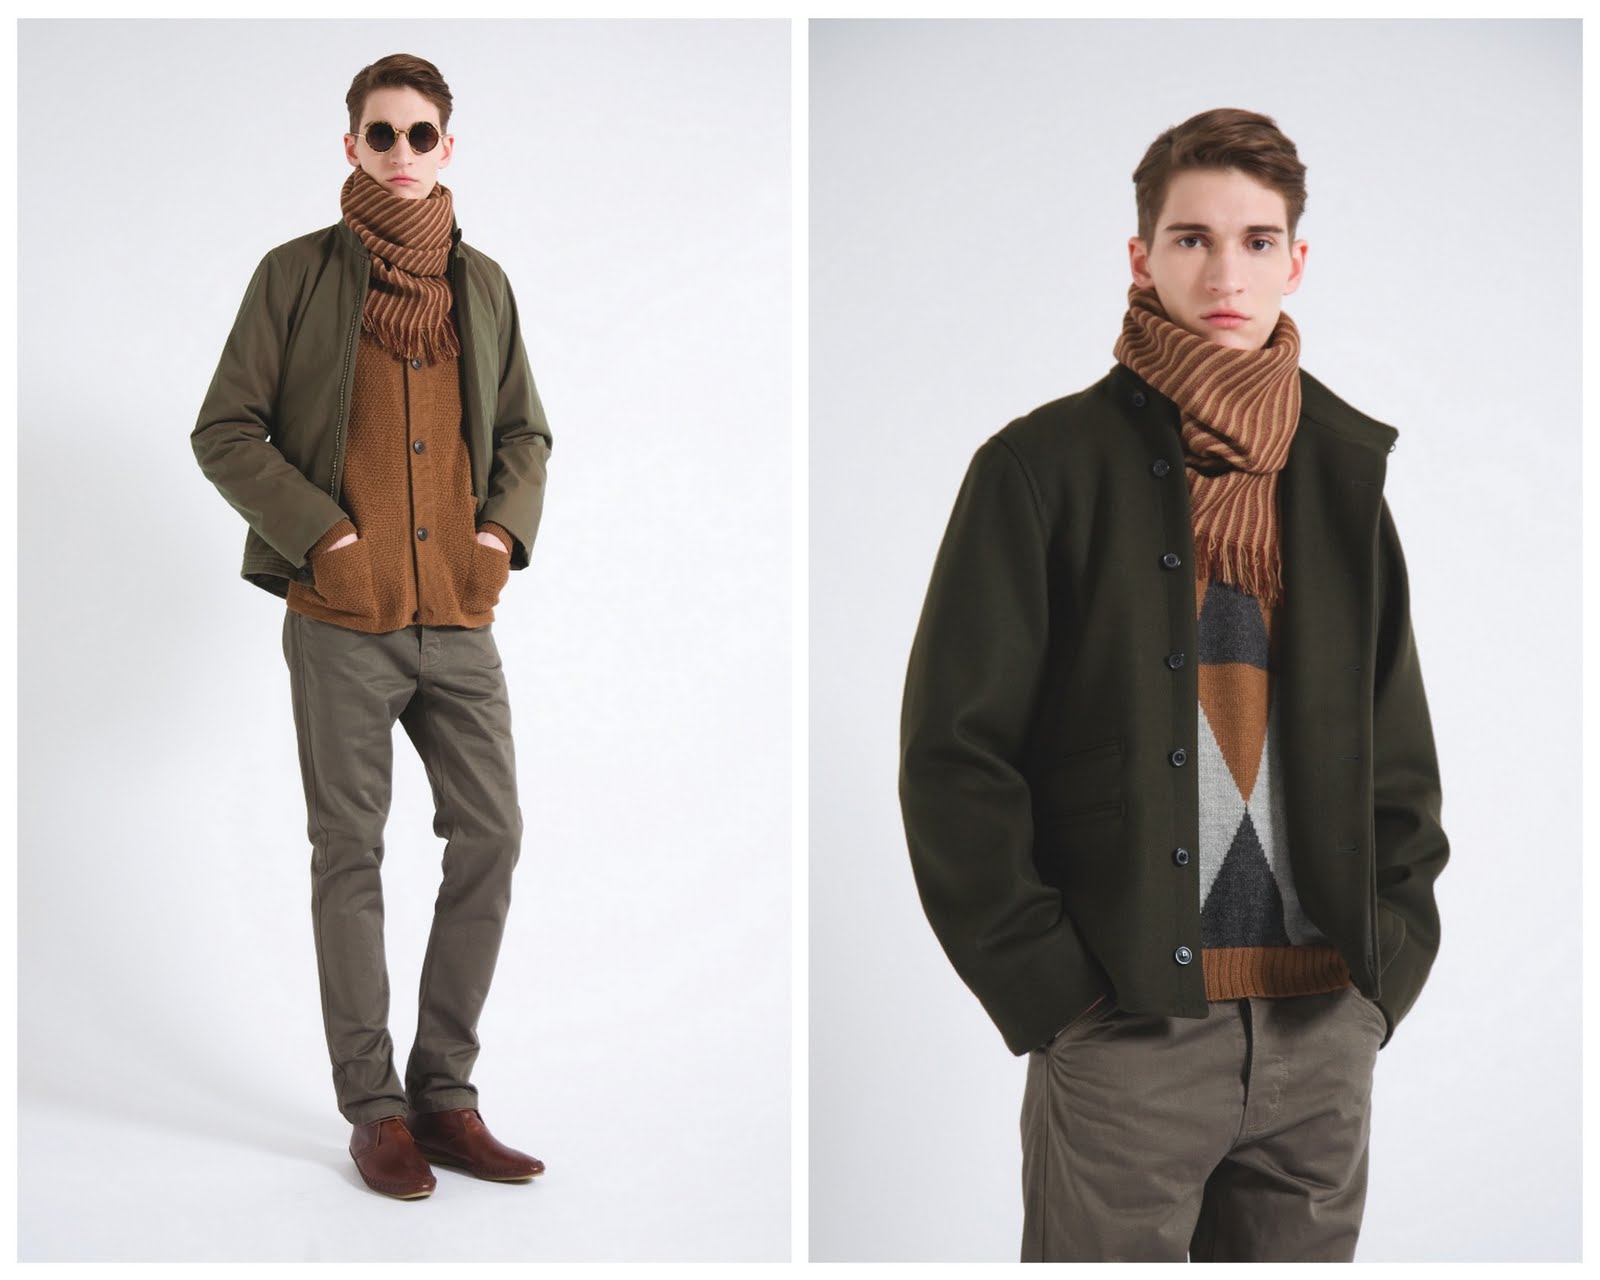 Style Salvage - A men's fashion and style blog.: Christophe Lemaire AW10